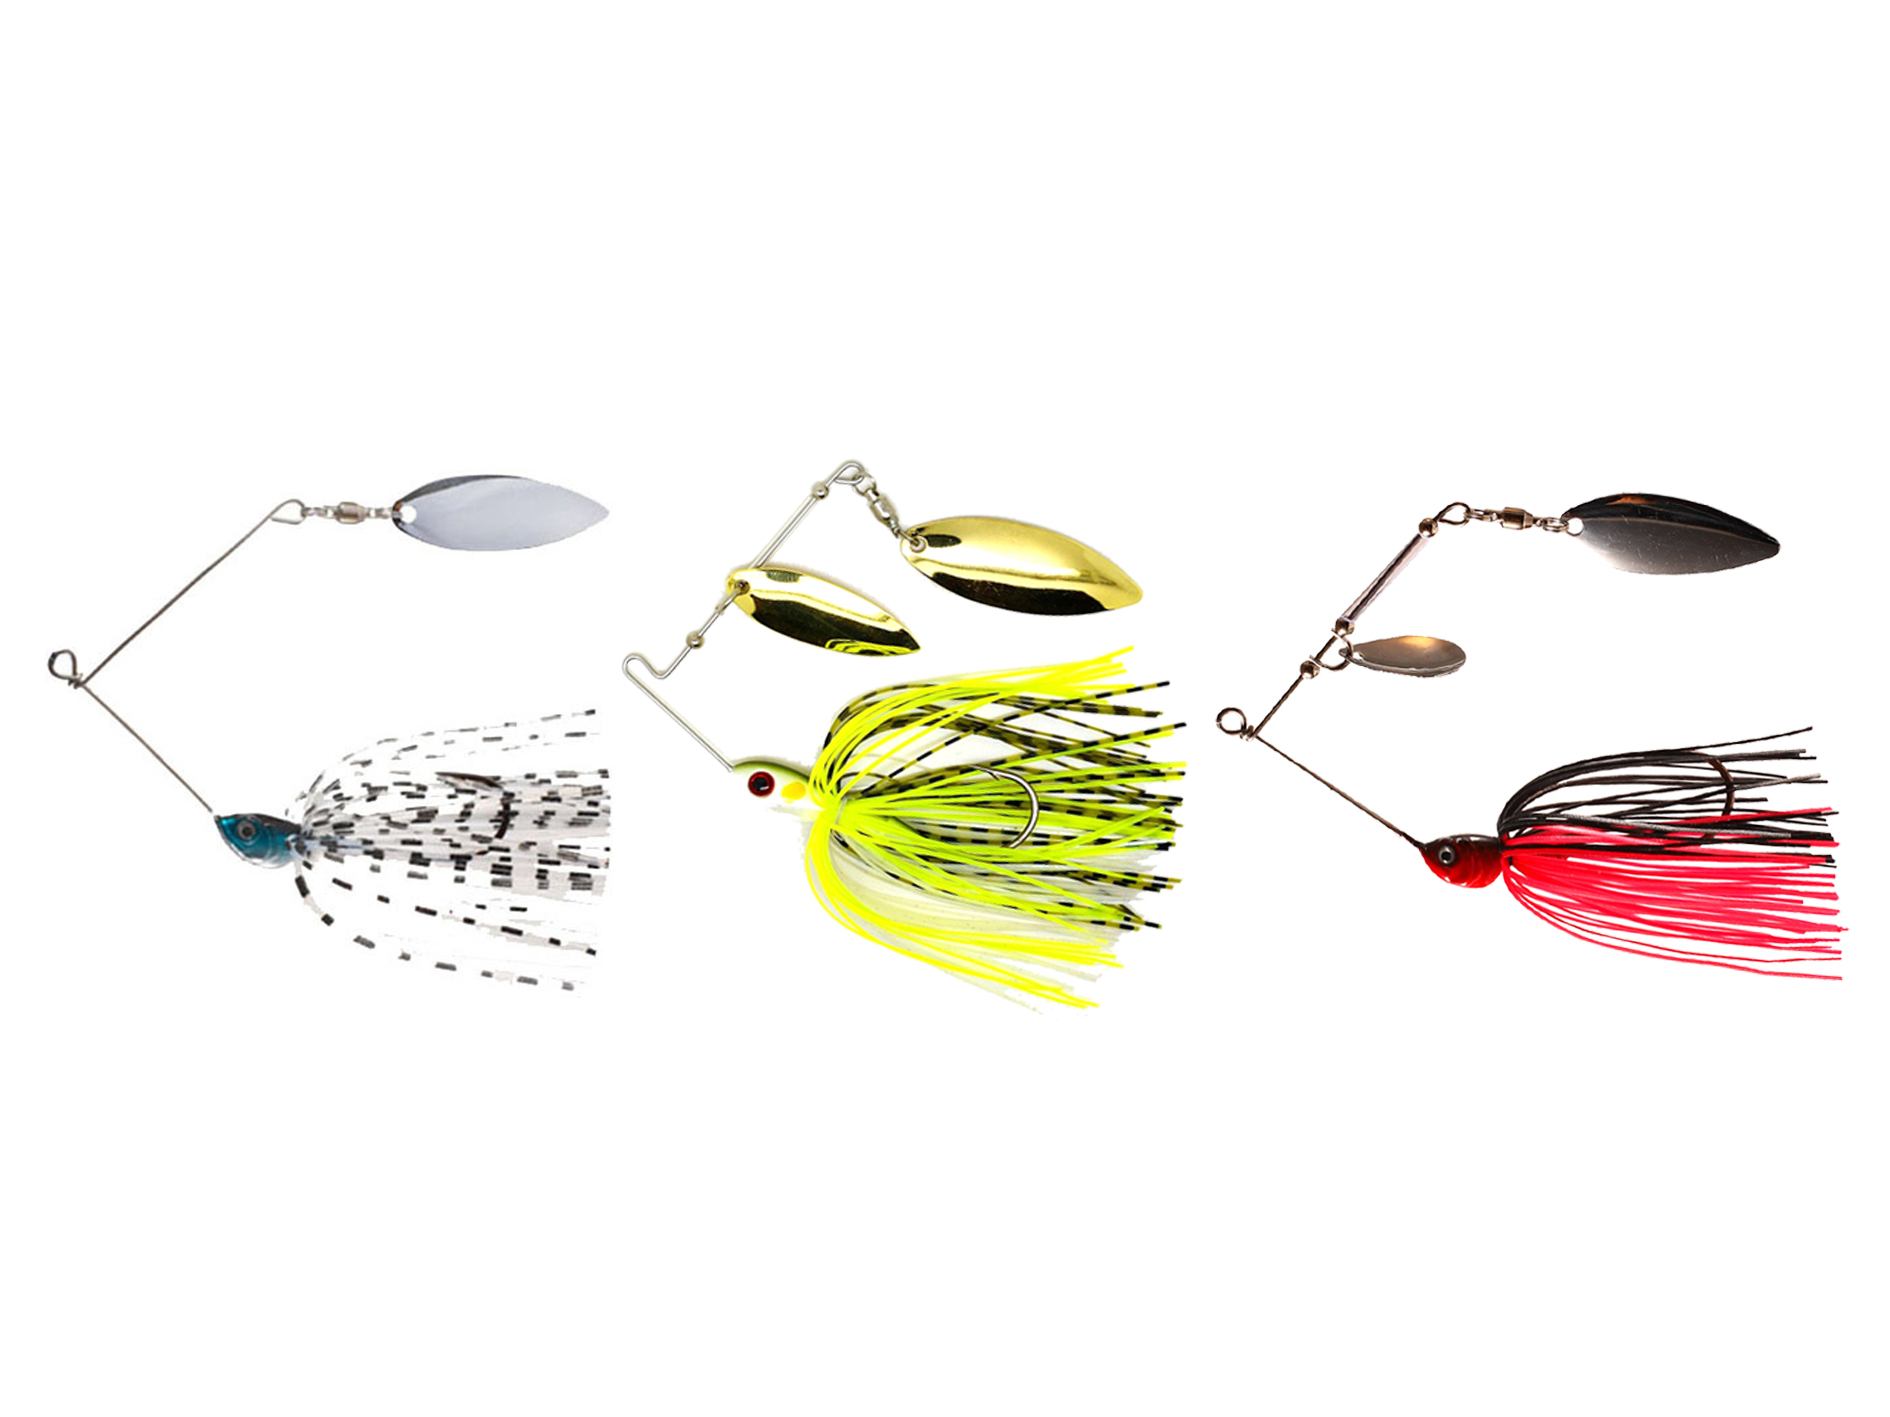 The difference between spinnerbait blades